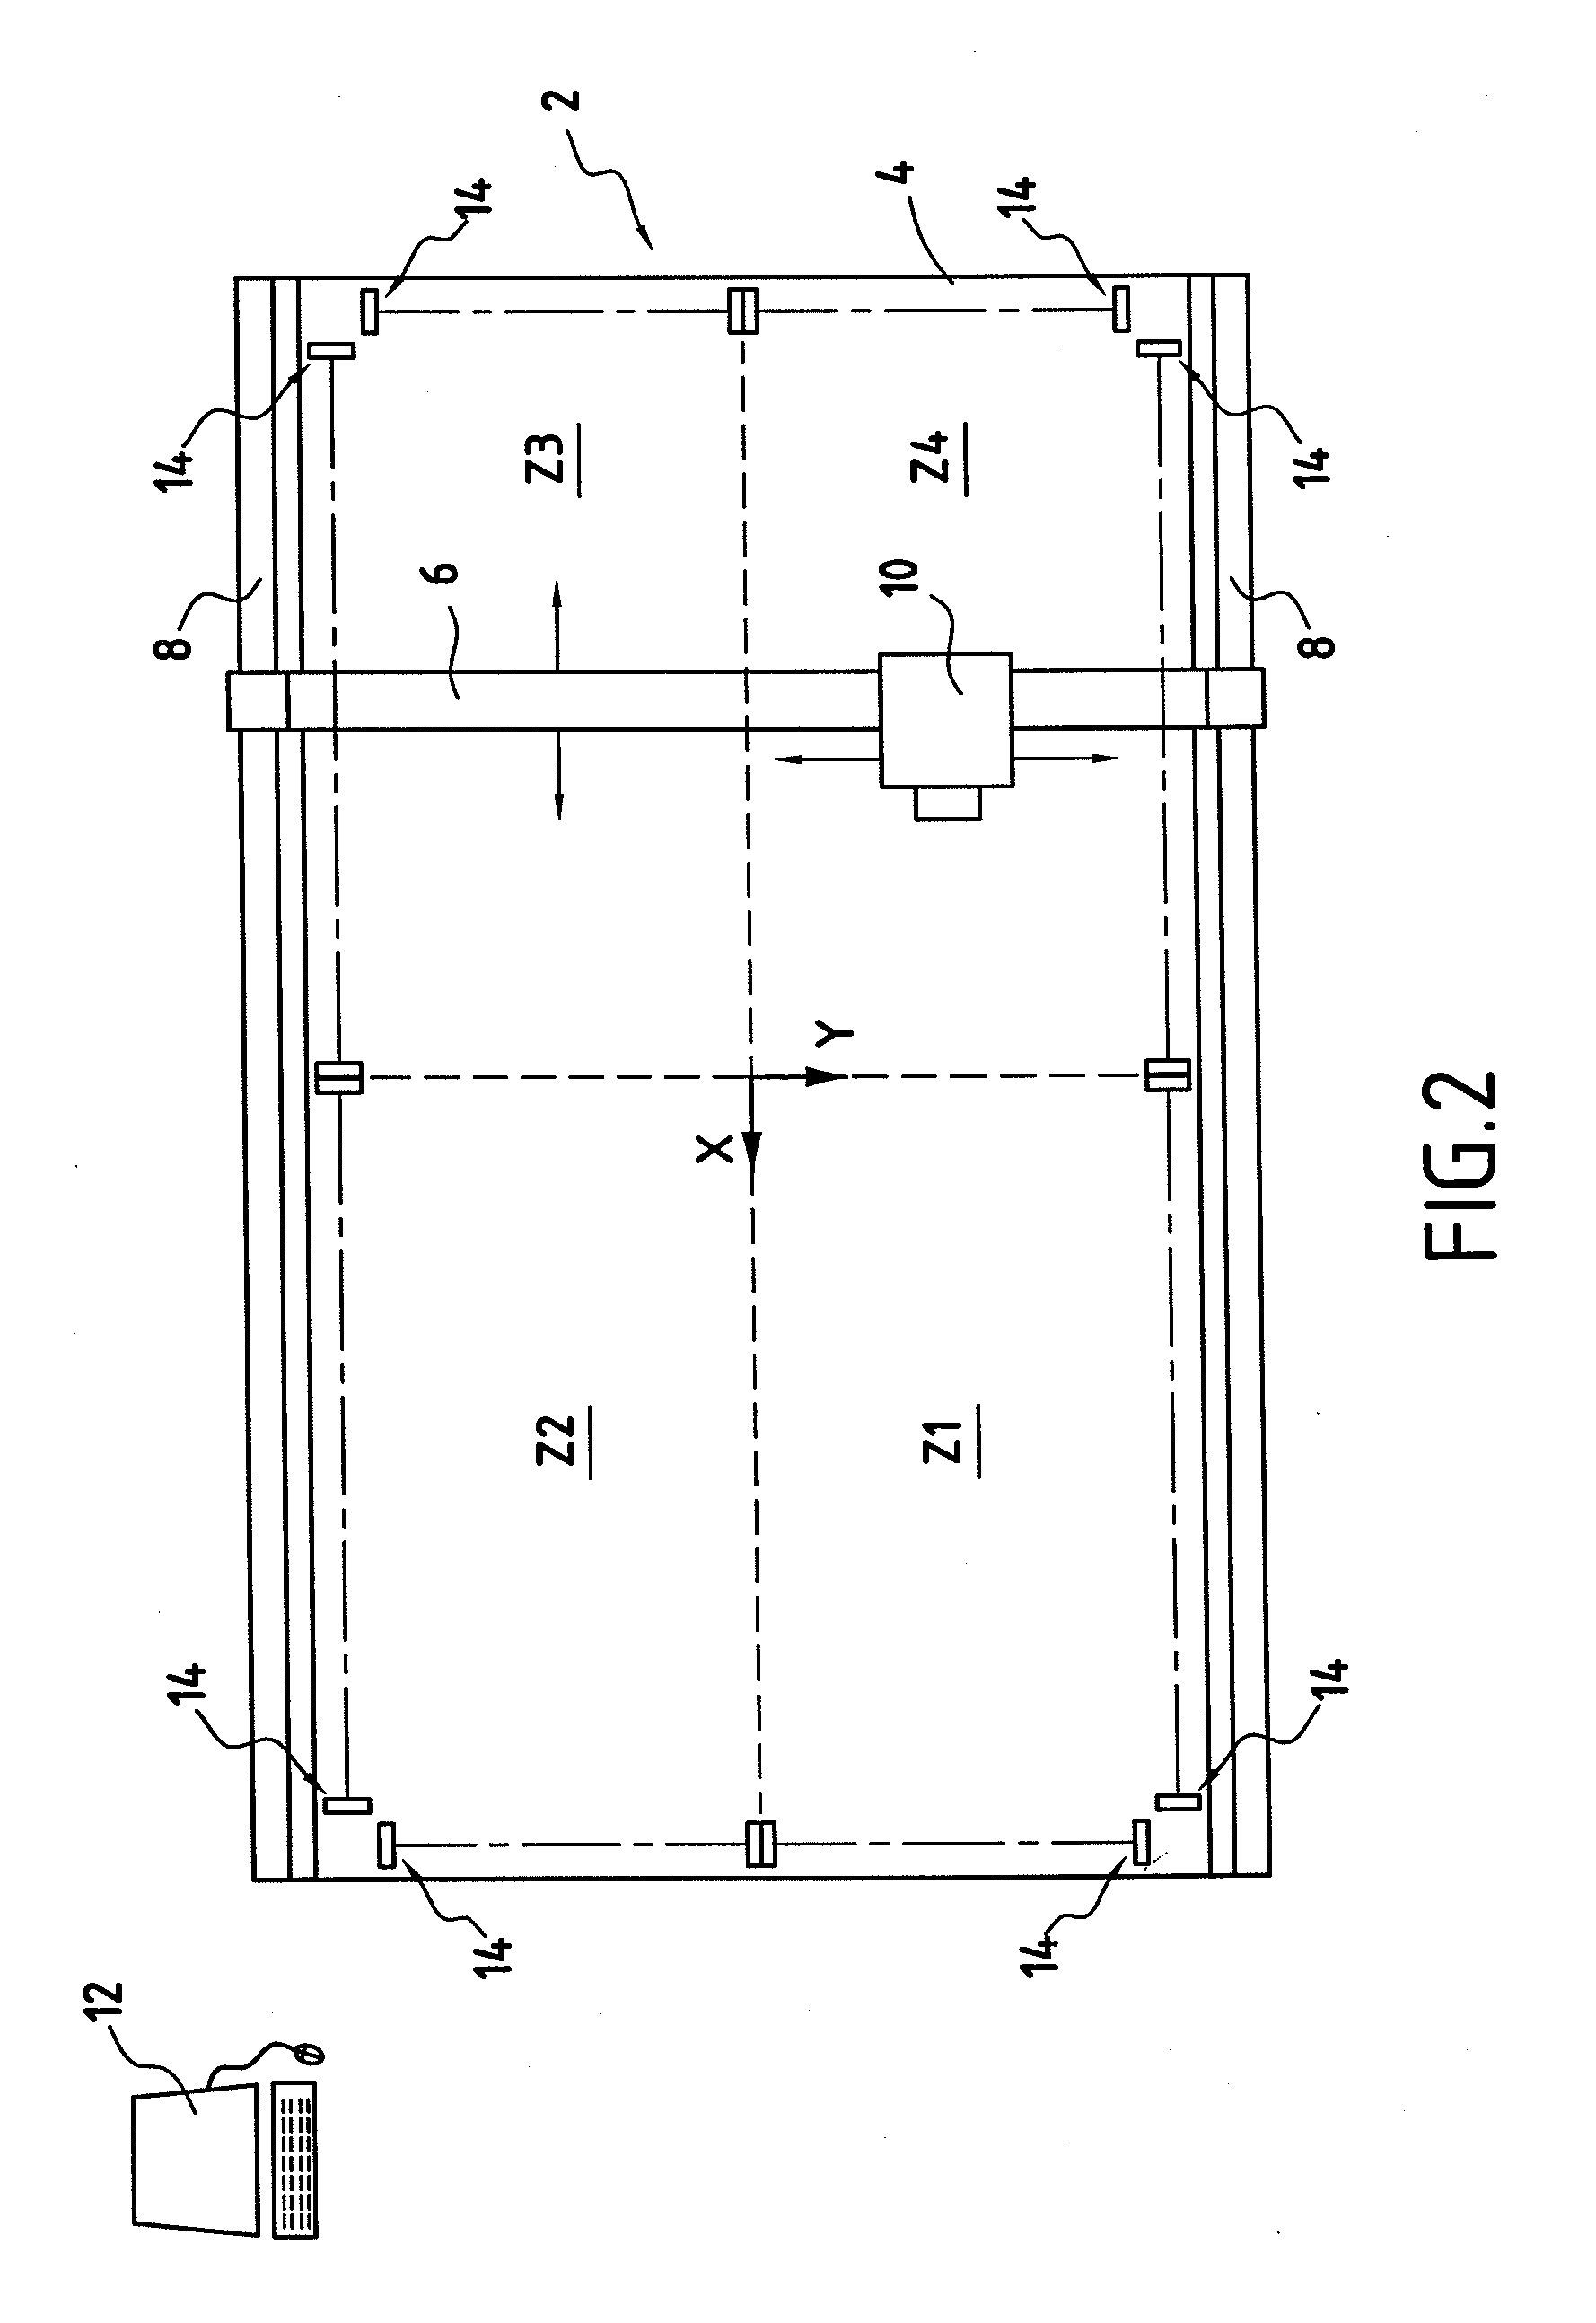 Method for Managing an Active Safety for an Automatically Operating Machine